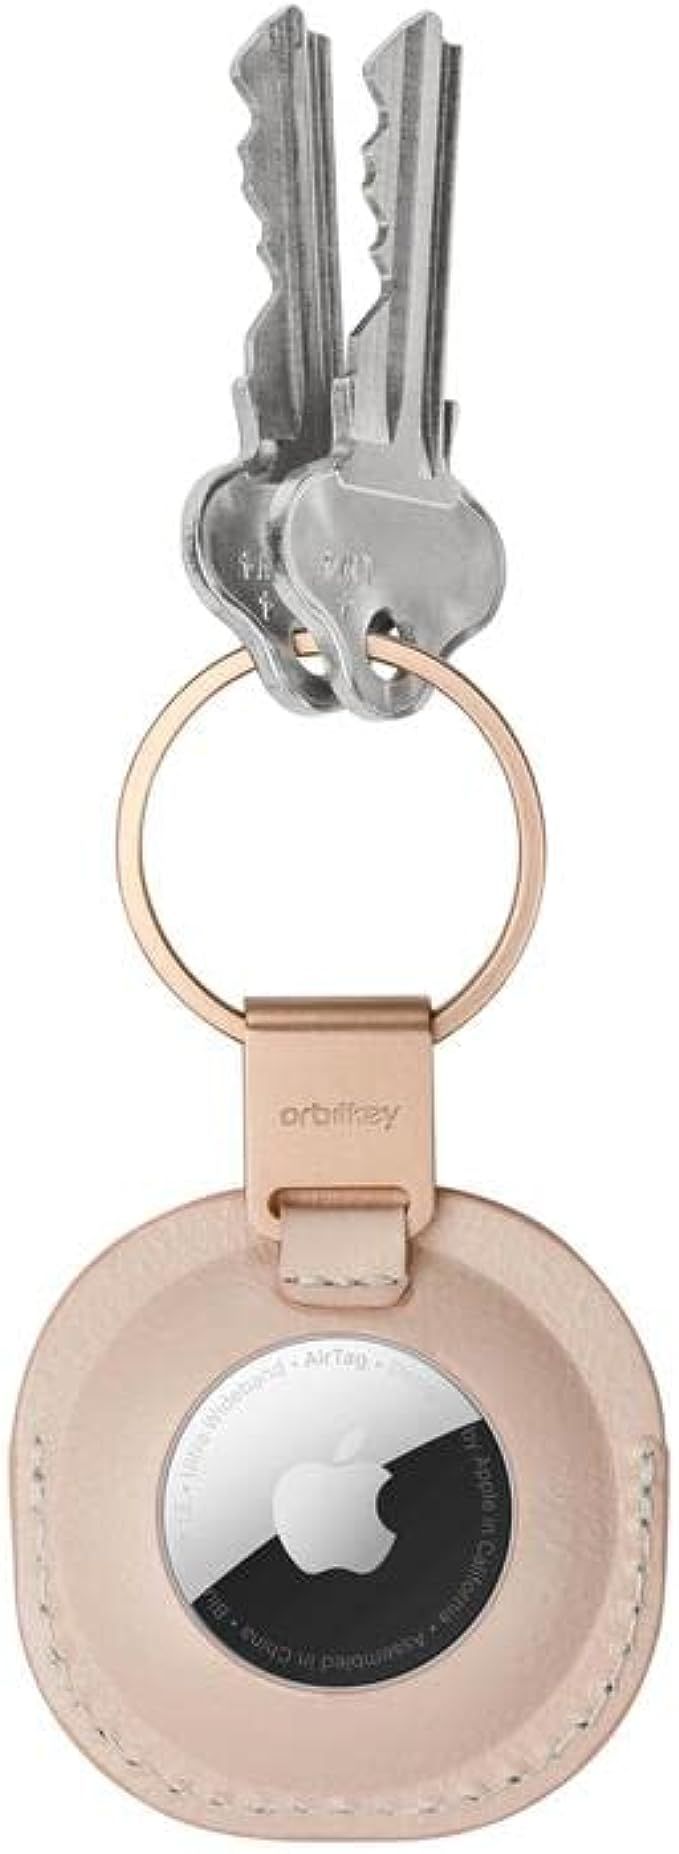 Orbitkey Leather Holder for Apple Airtag | Patent-Pending Quick Release Key Ring | LWG-Certified ... | Amazon (US)